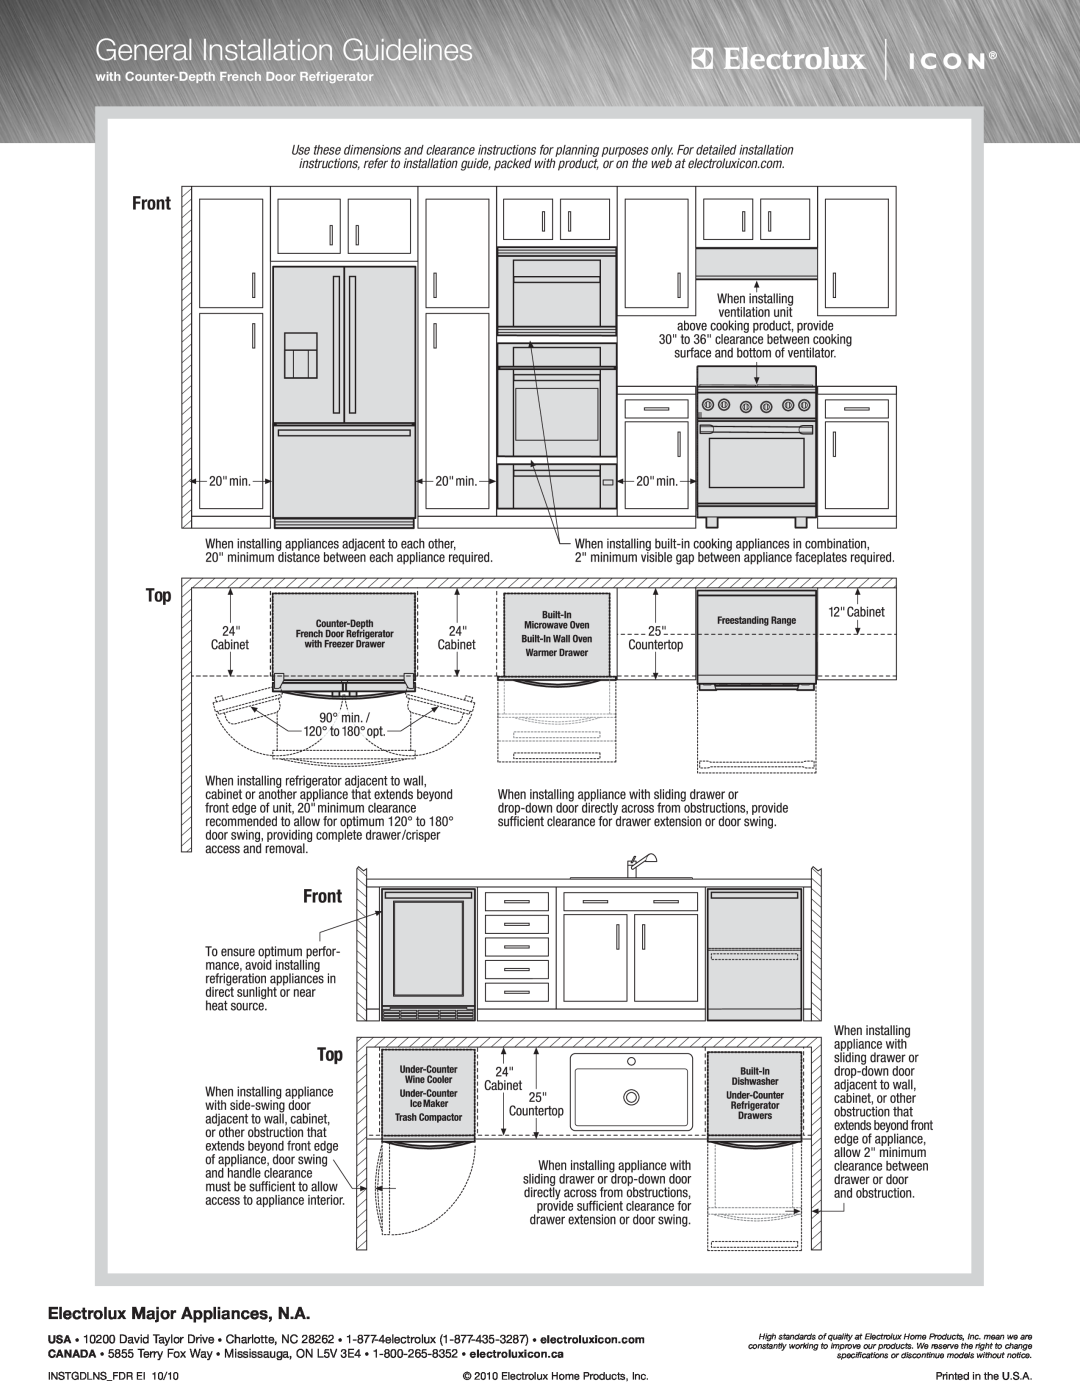 Electrolux E30EW85GPS specifications General Installation Guidelines, Front, Electrolux Major Appliances, N.A 